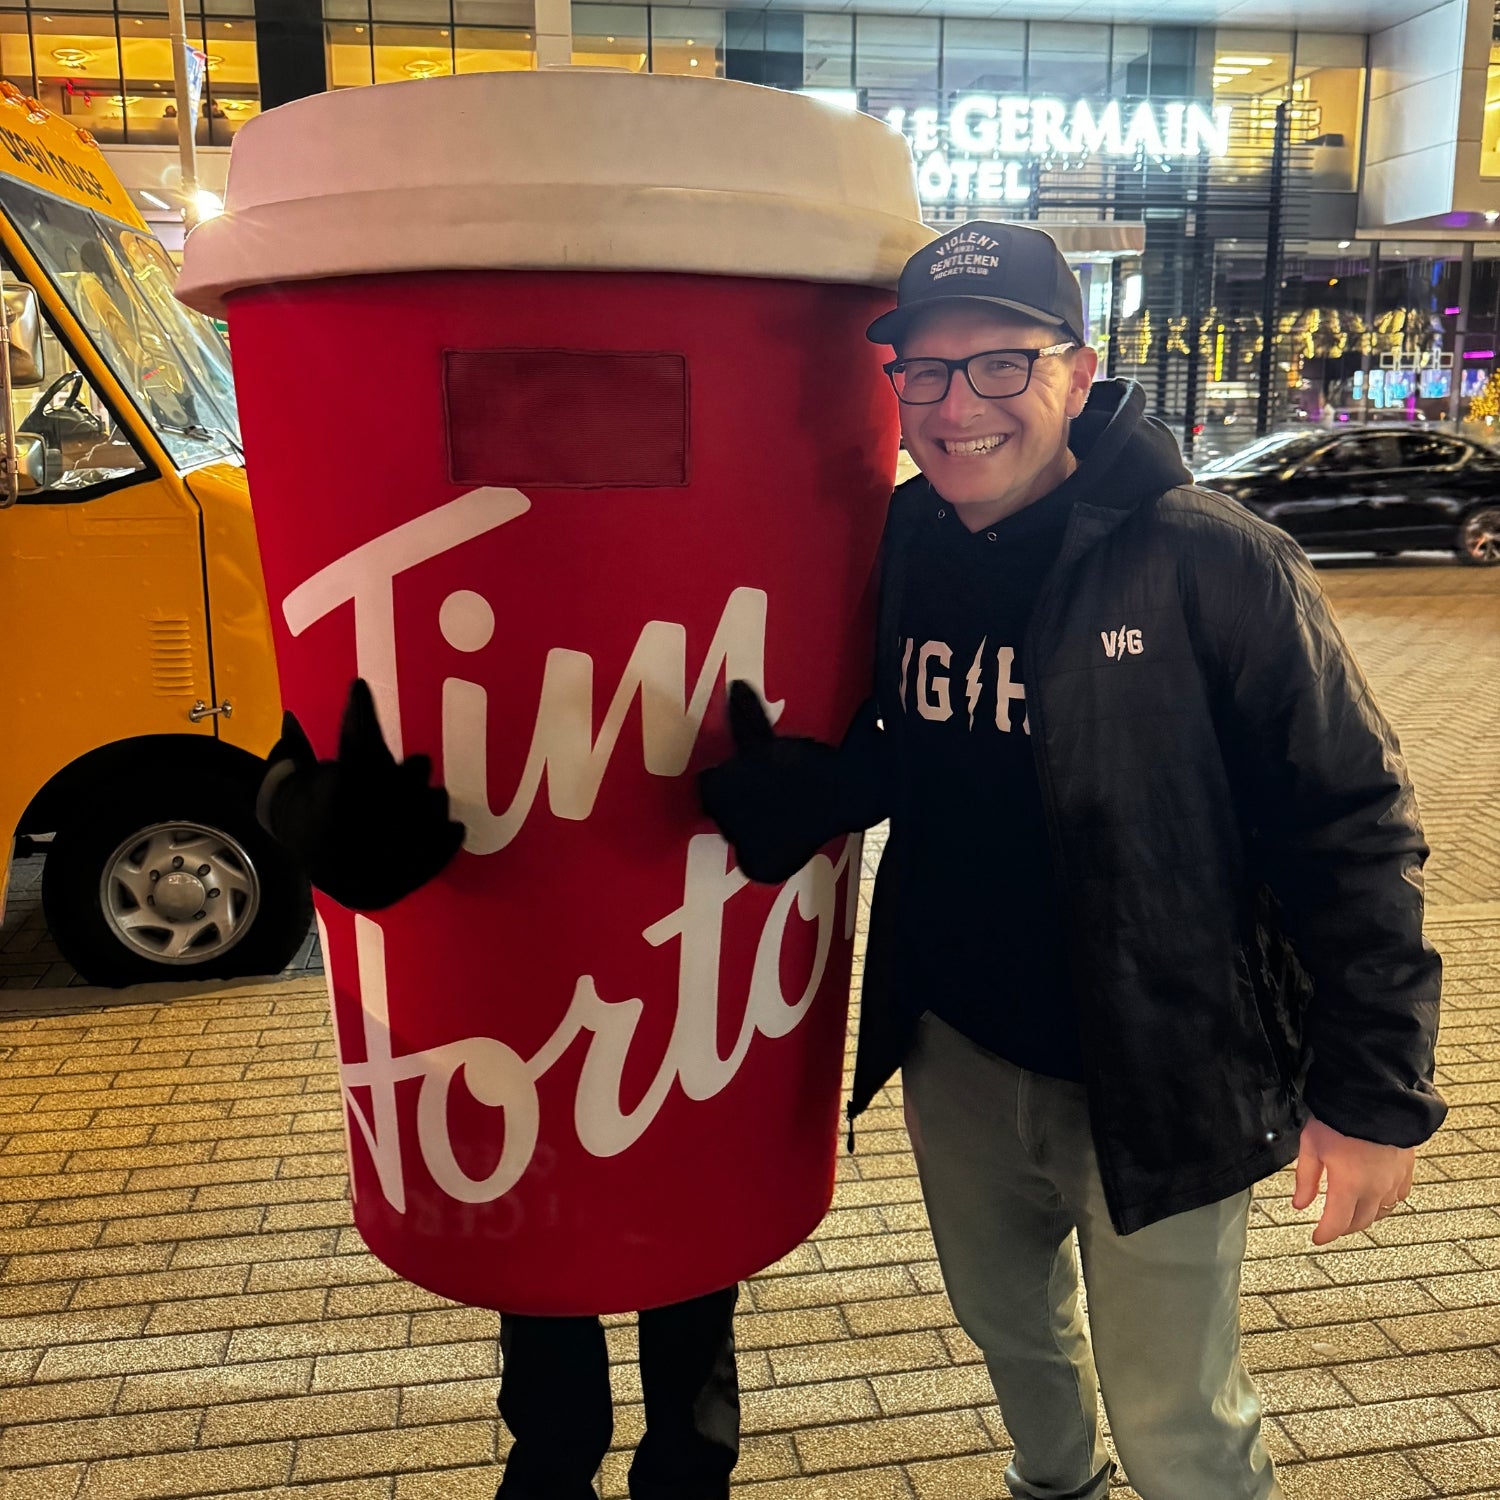 We sent some of the crew out to Toronto a few weeks ago to check out the NHL All Star game for some work and play. Safe to say the trip did not disappoint! Violent Gentlemen's very own "dad" reflects back on his trip to share some of the highlights. Check it out!